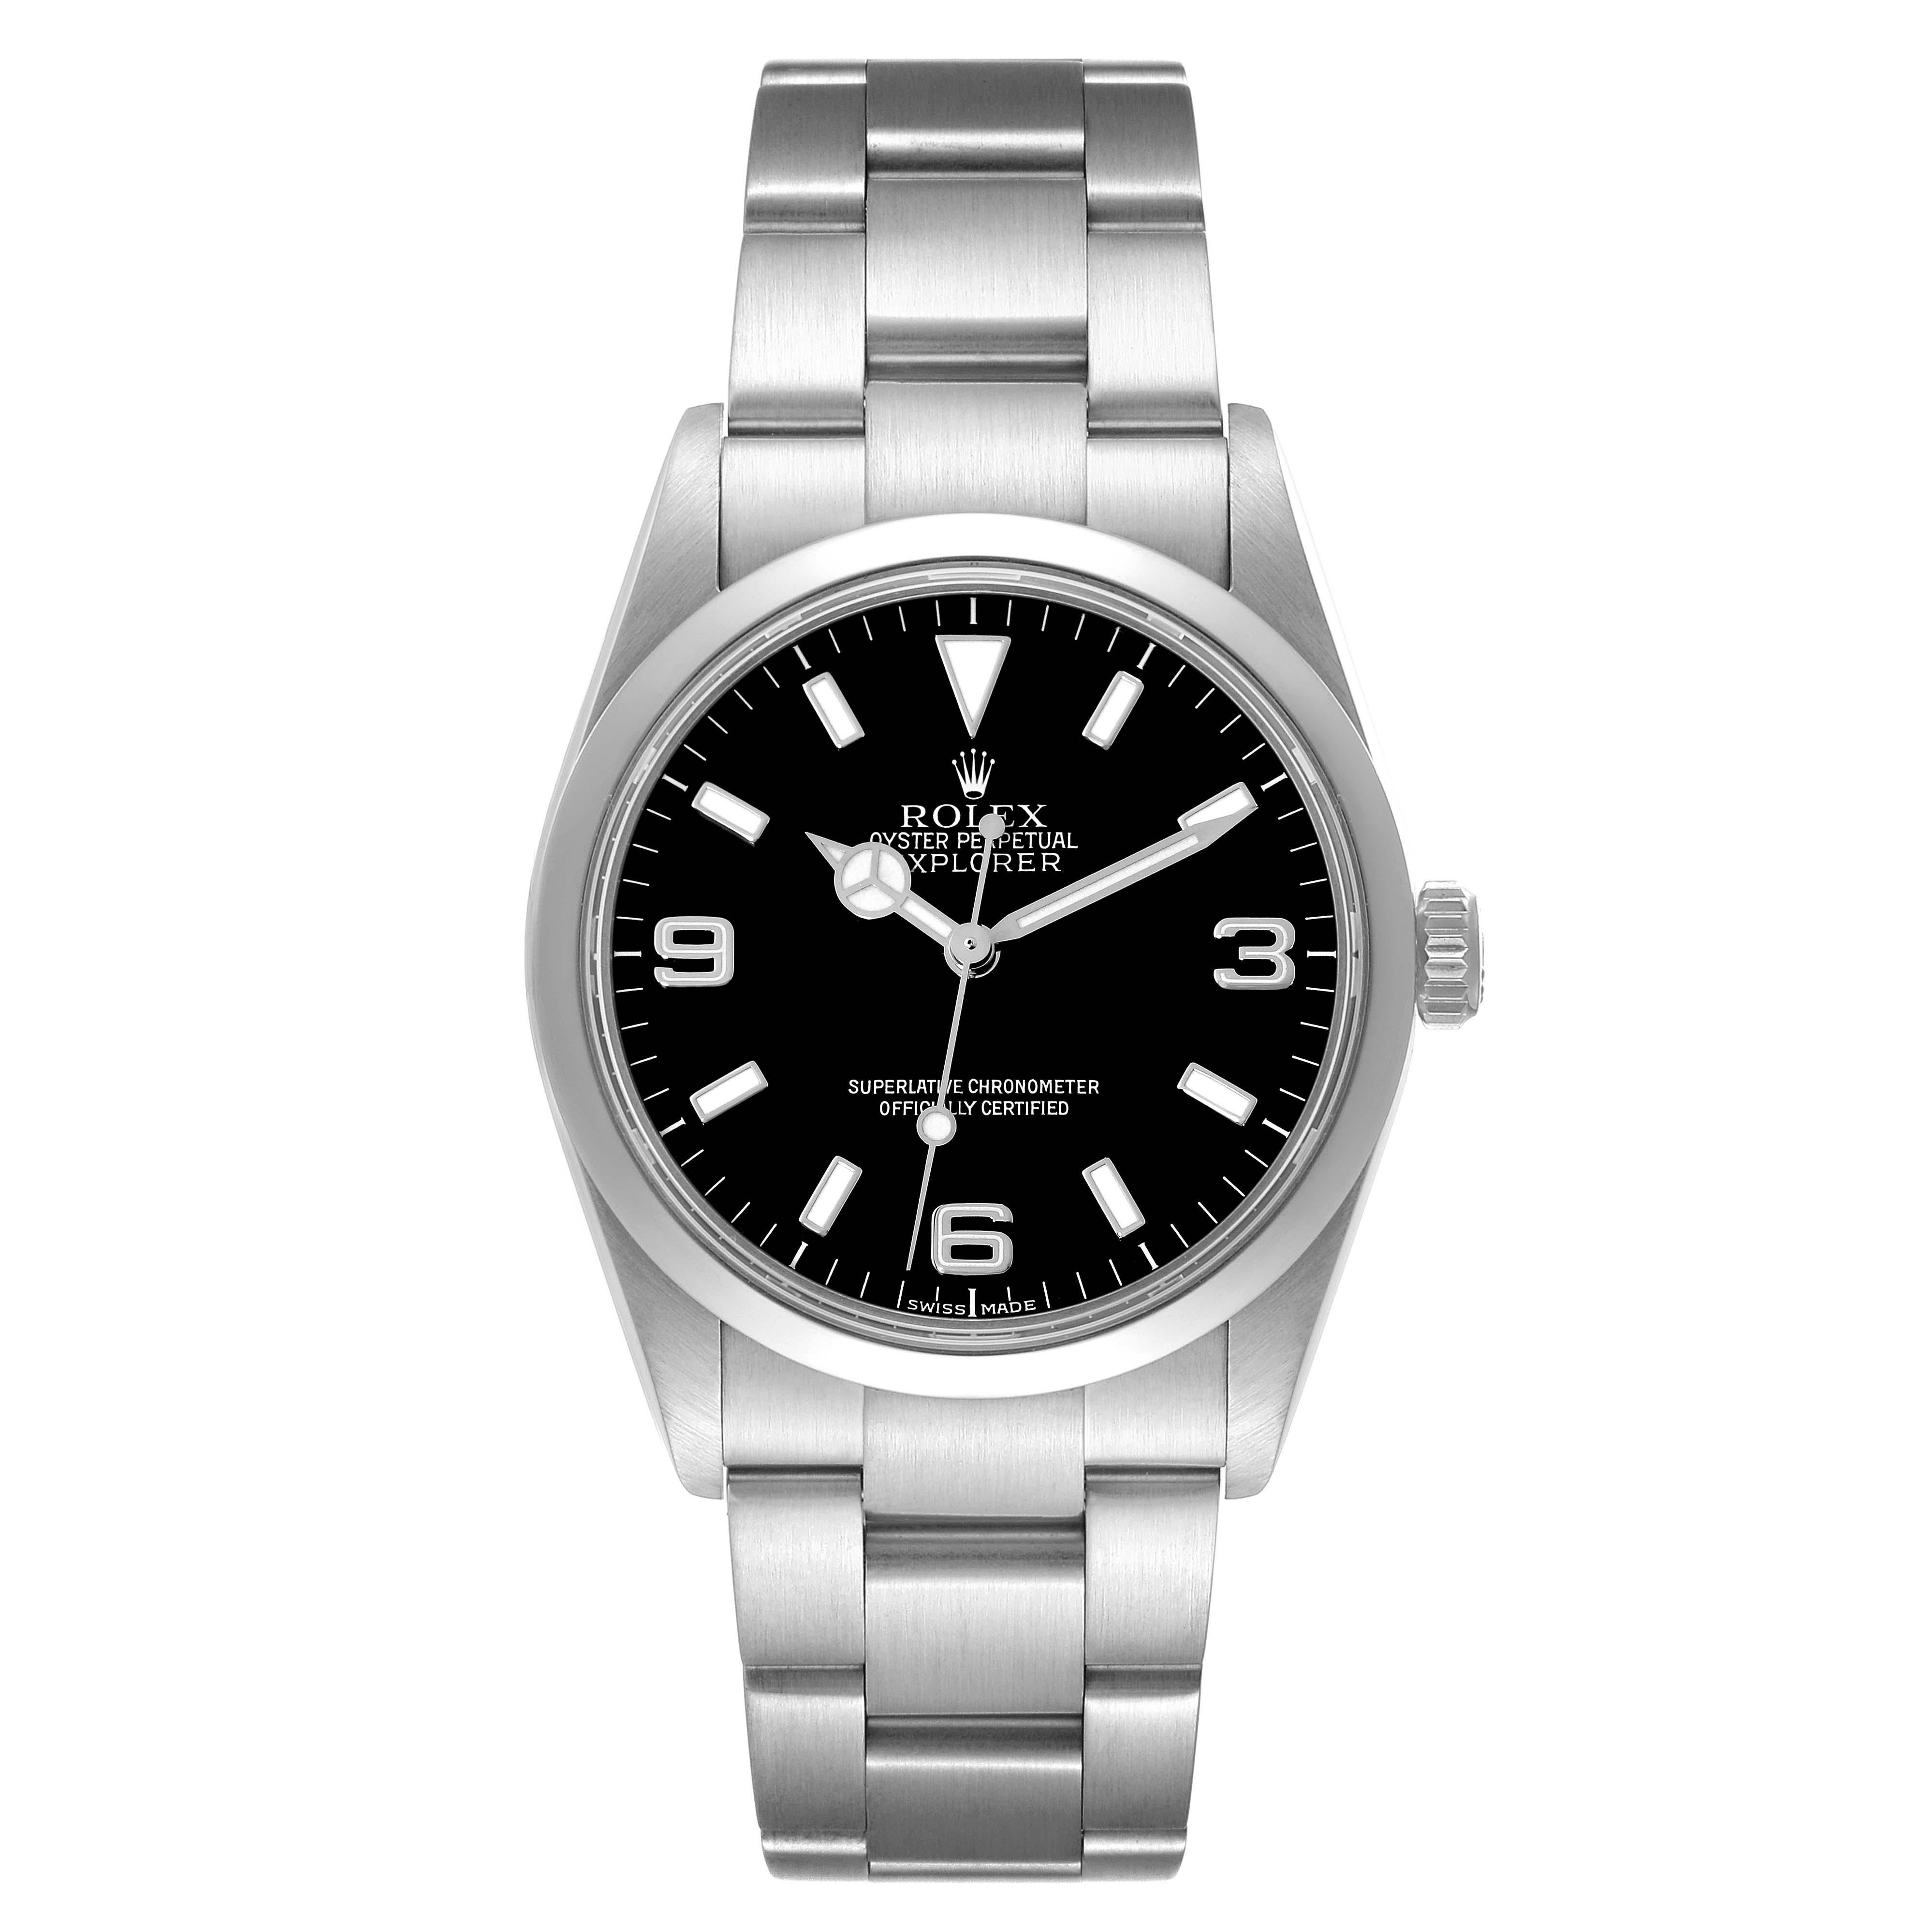 Rolex Explorer I Black Dial Steel Mens Watch 114270. Officially certified chronometer automatic self-winding movement. Stainless steel case 36.0 mm in diameter. Rolex logo on the crown. Stainless steel smooth bezel. Scratch resistant sapphire